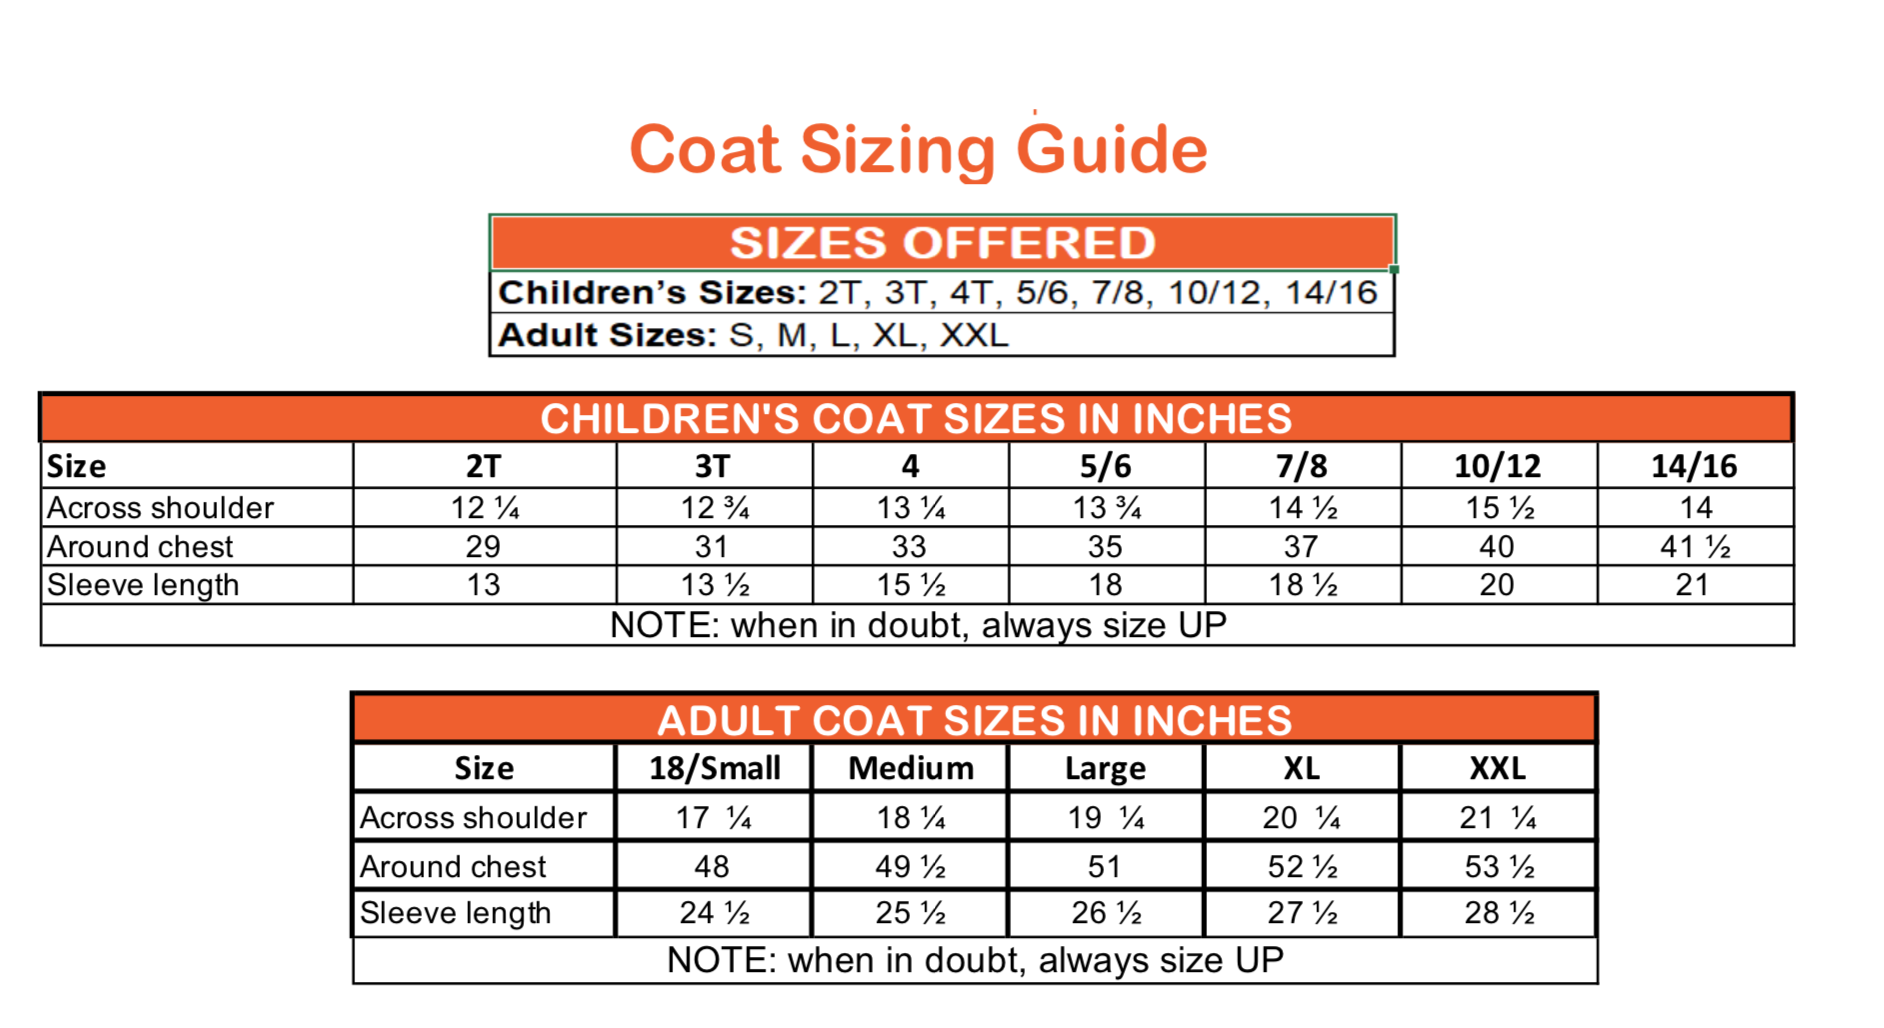 If unsure of the size, please measure your child based on the measurements below. 